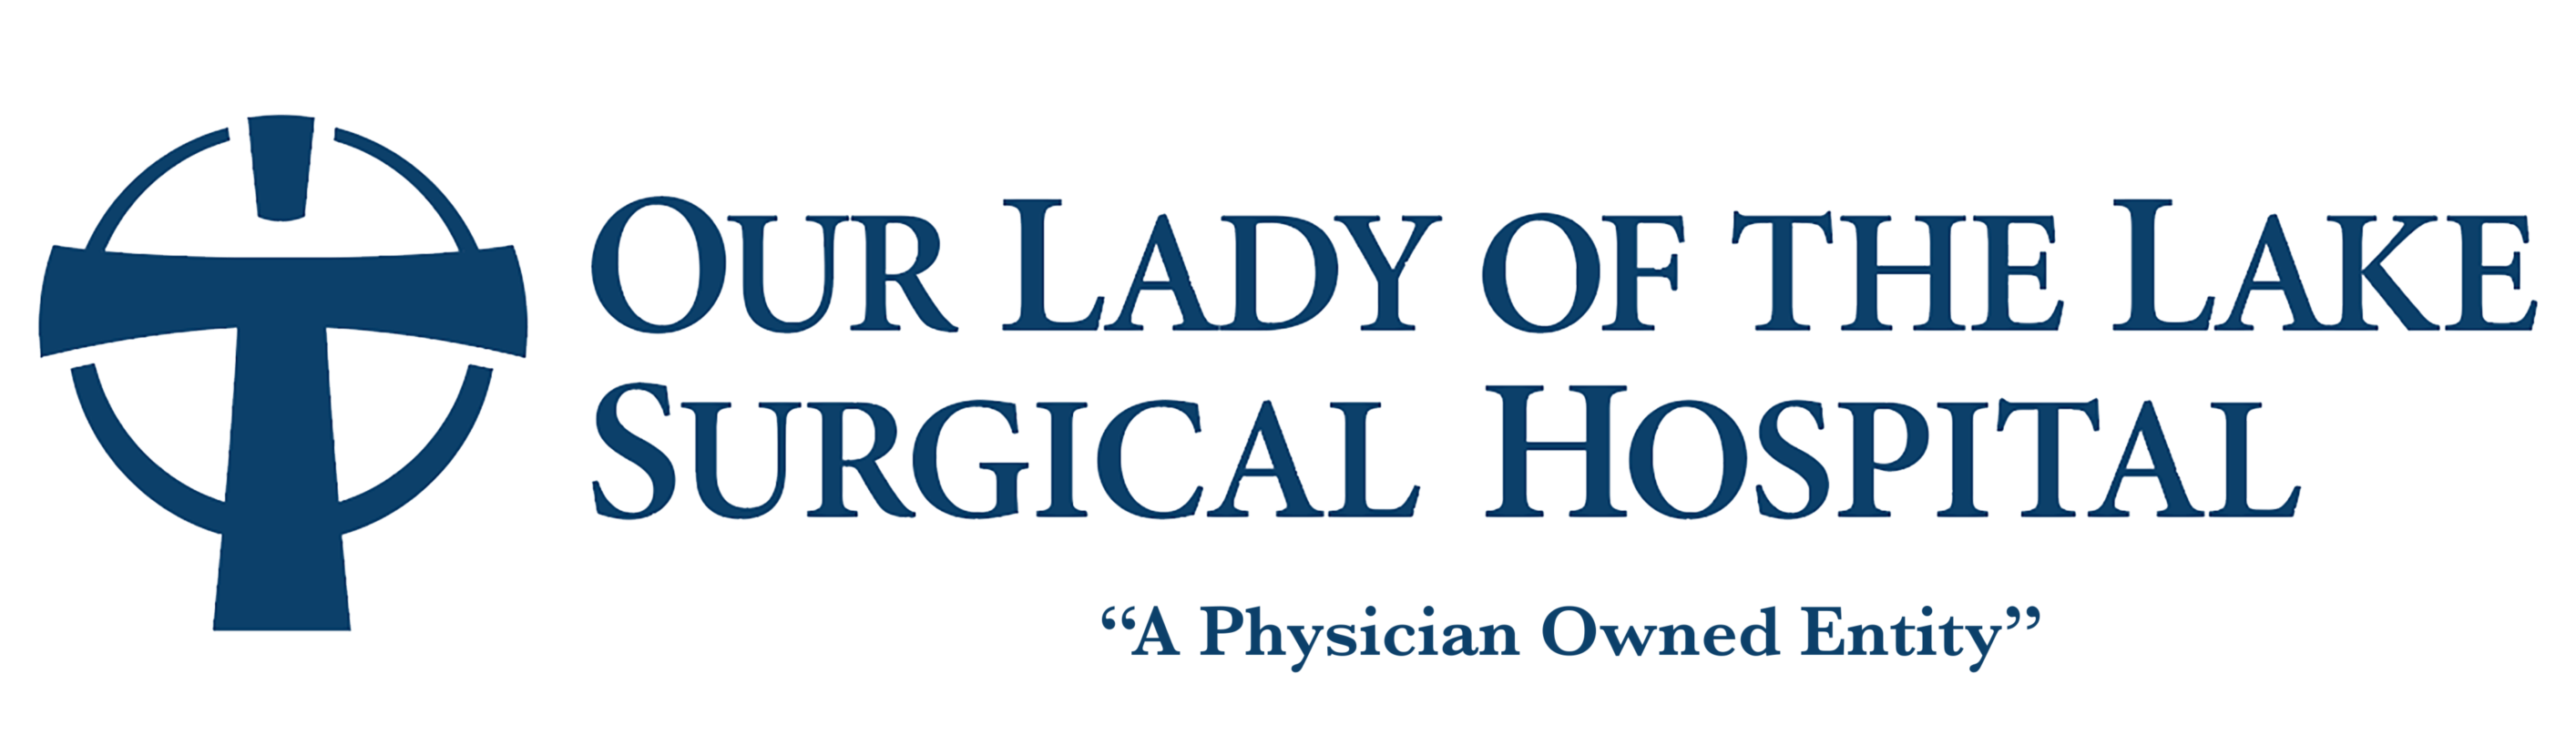 Our Lady of the Lake Surgical Hospital Company Logo